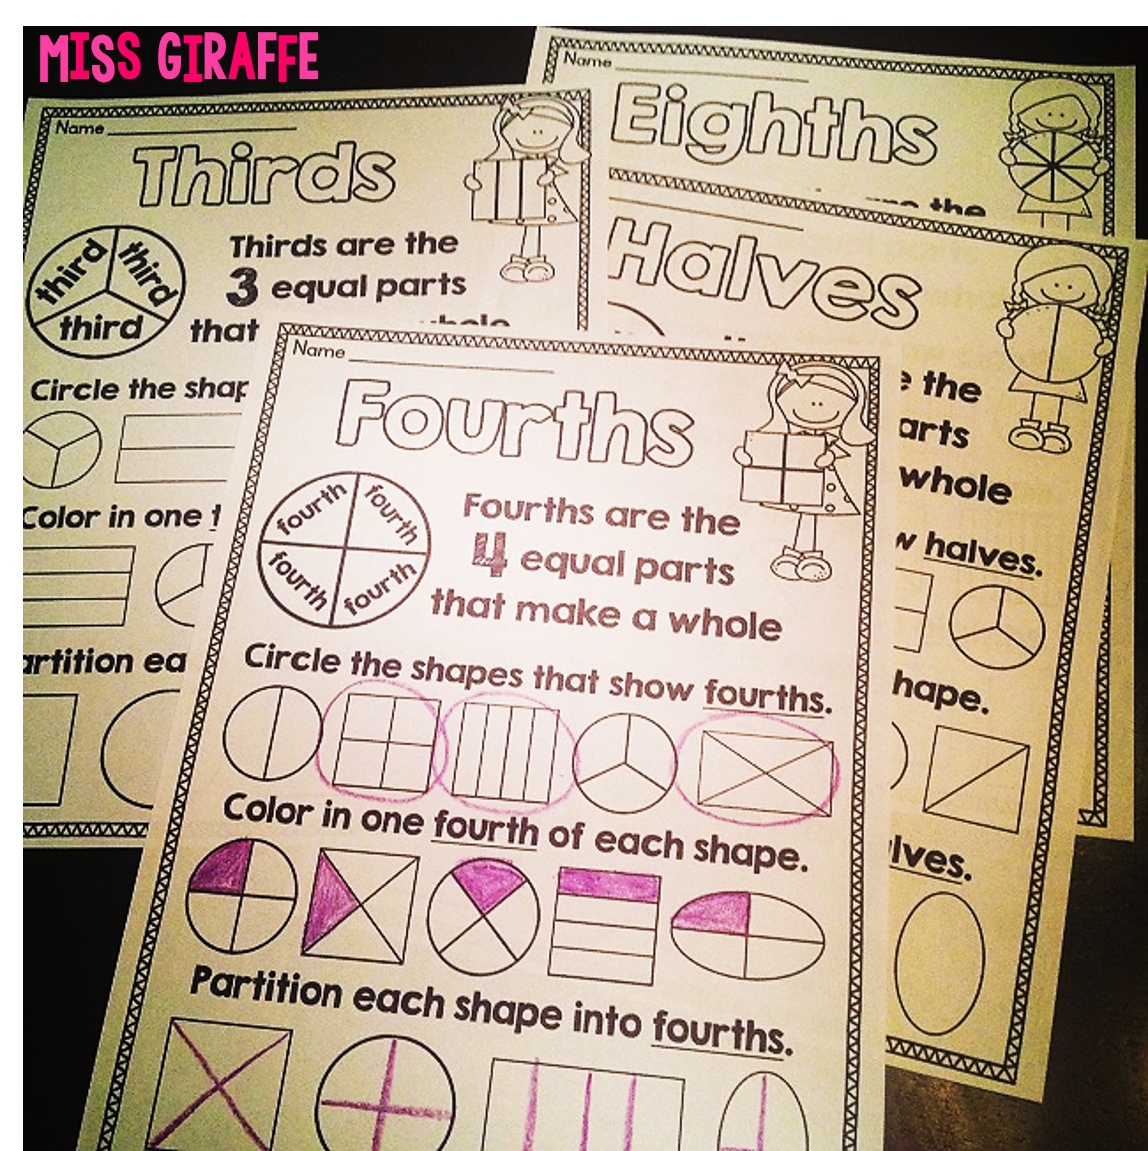 Fractions worksheets to teach halves fourths thirds and a lot of other great fractions activities and ideas